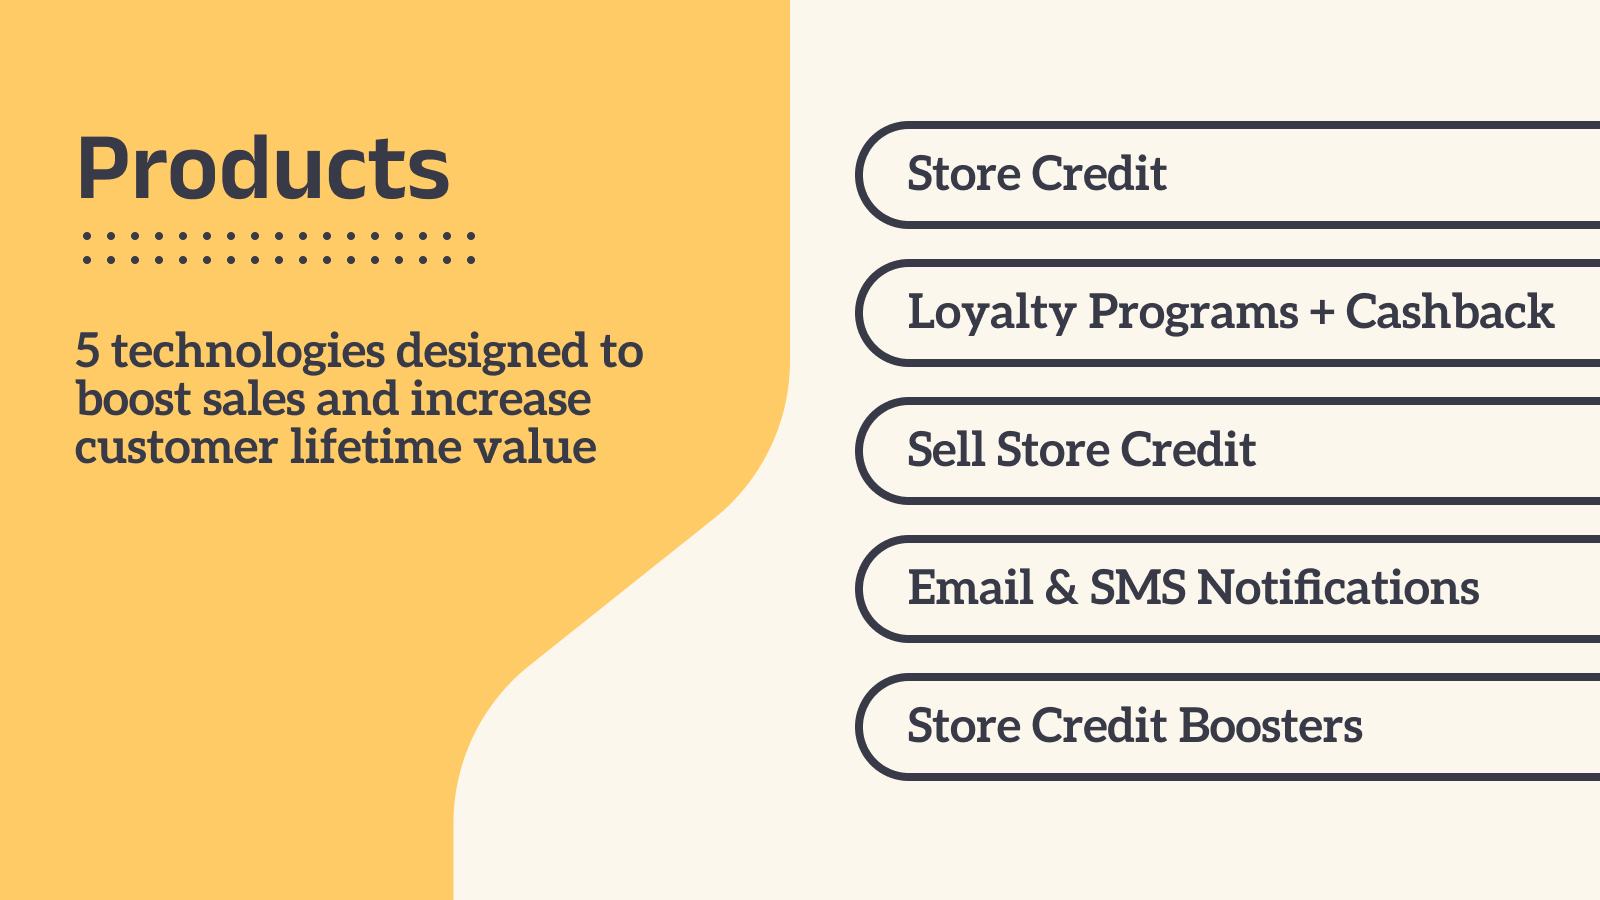 Main store credit products | Pabloo